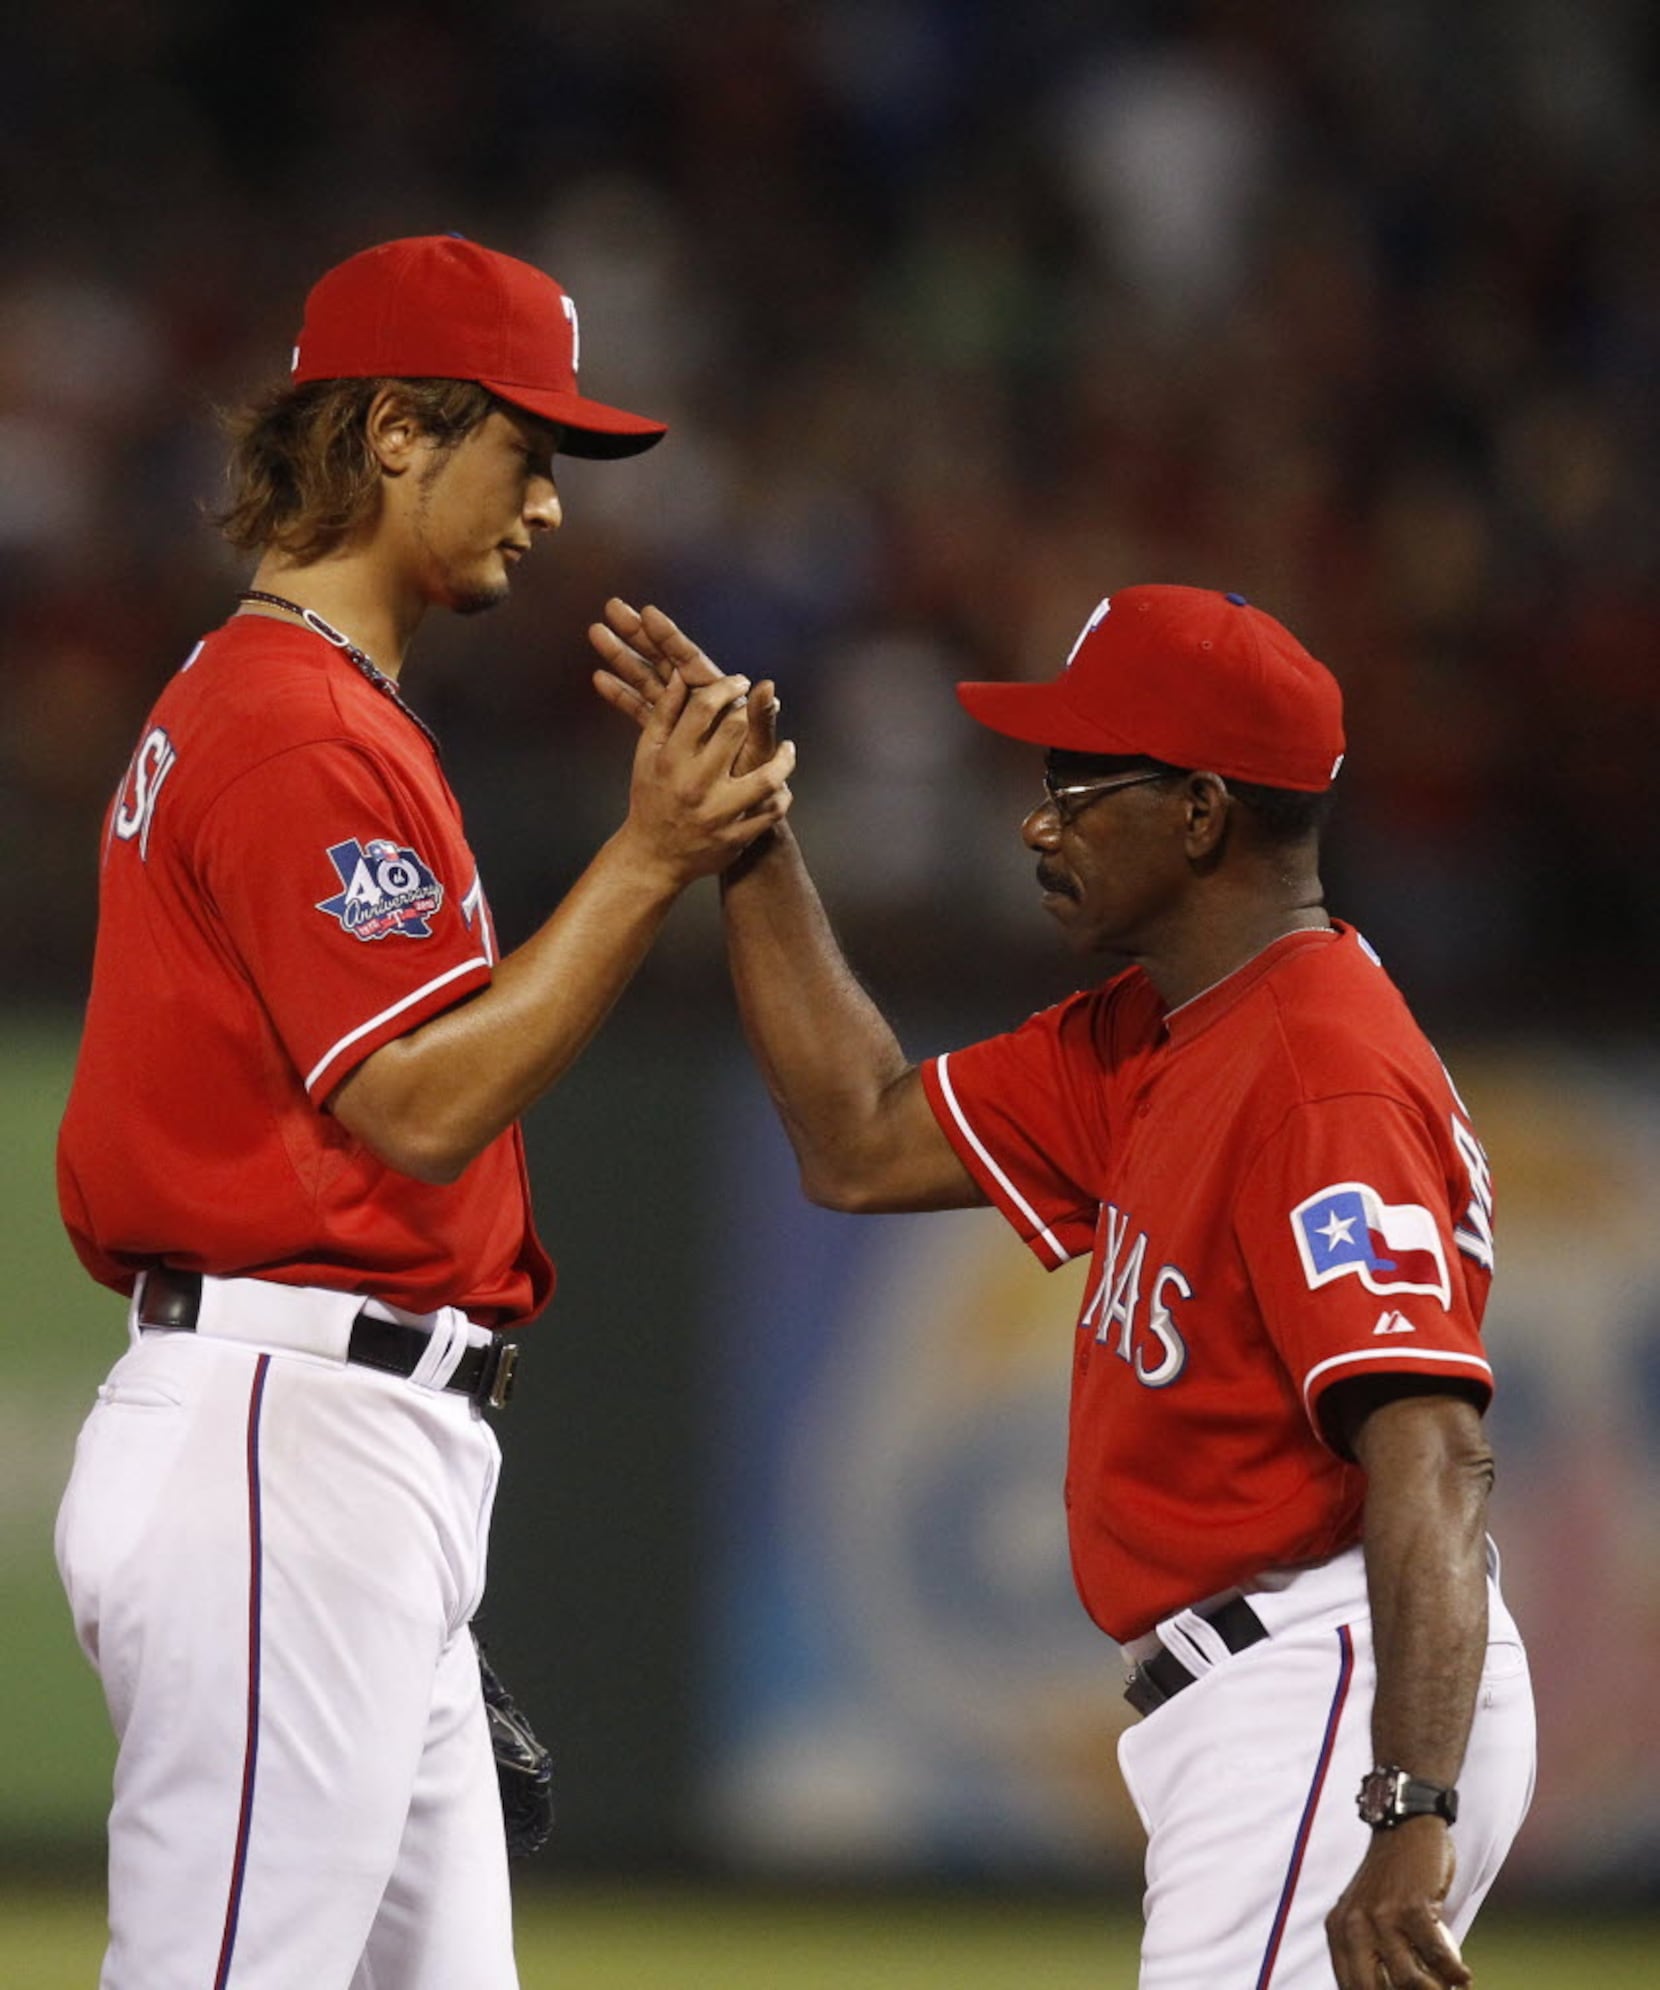 Fraley: When it comes to Yu Darvish, Rangers should proceed with caution